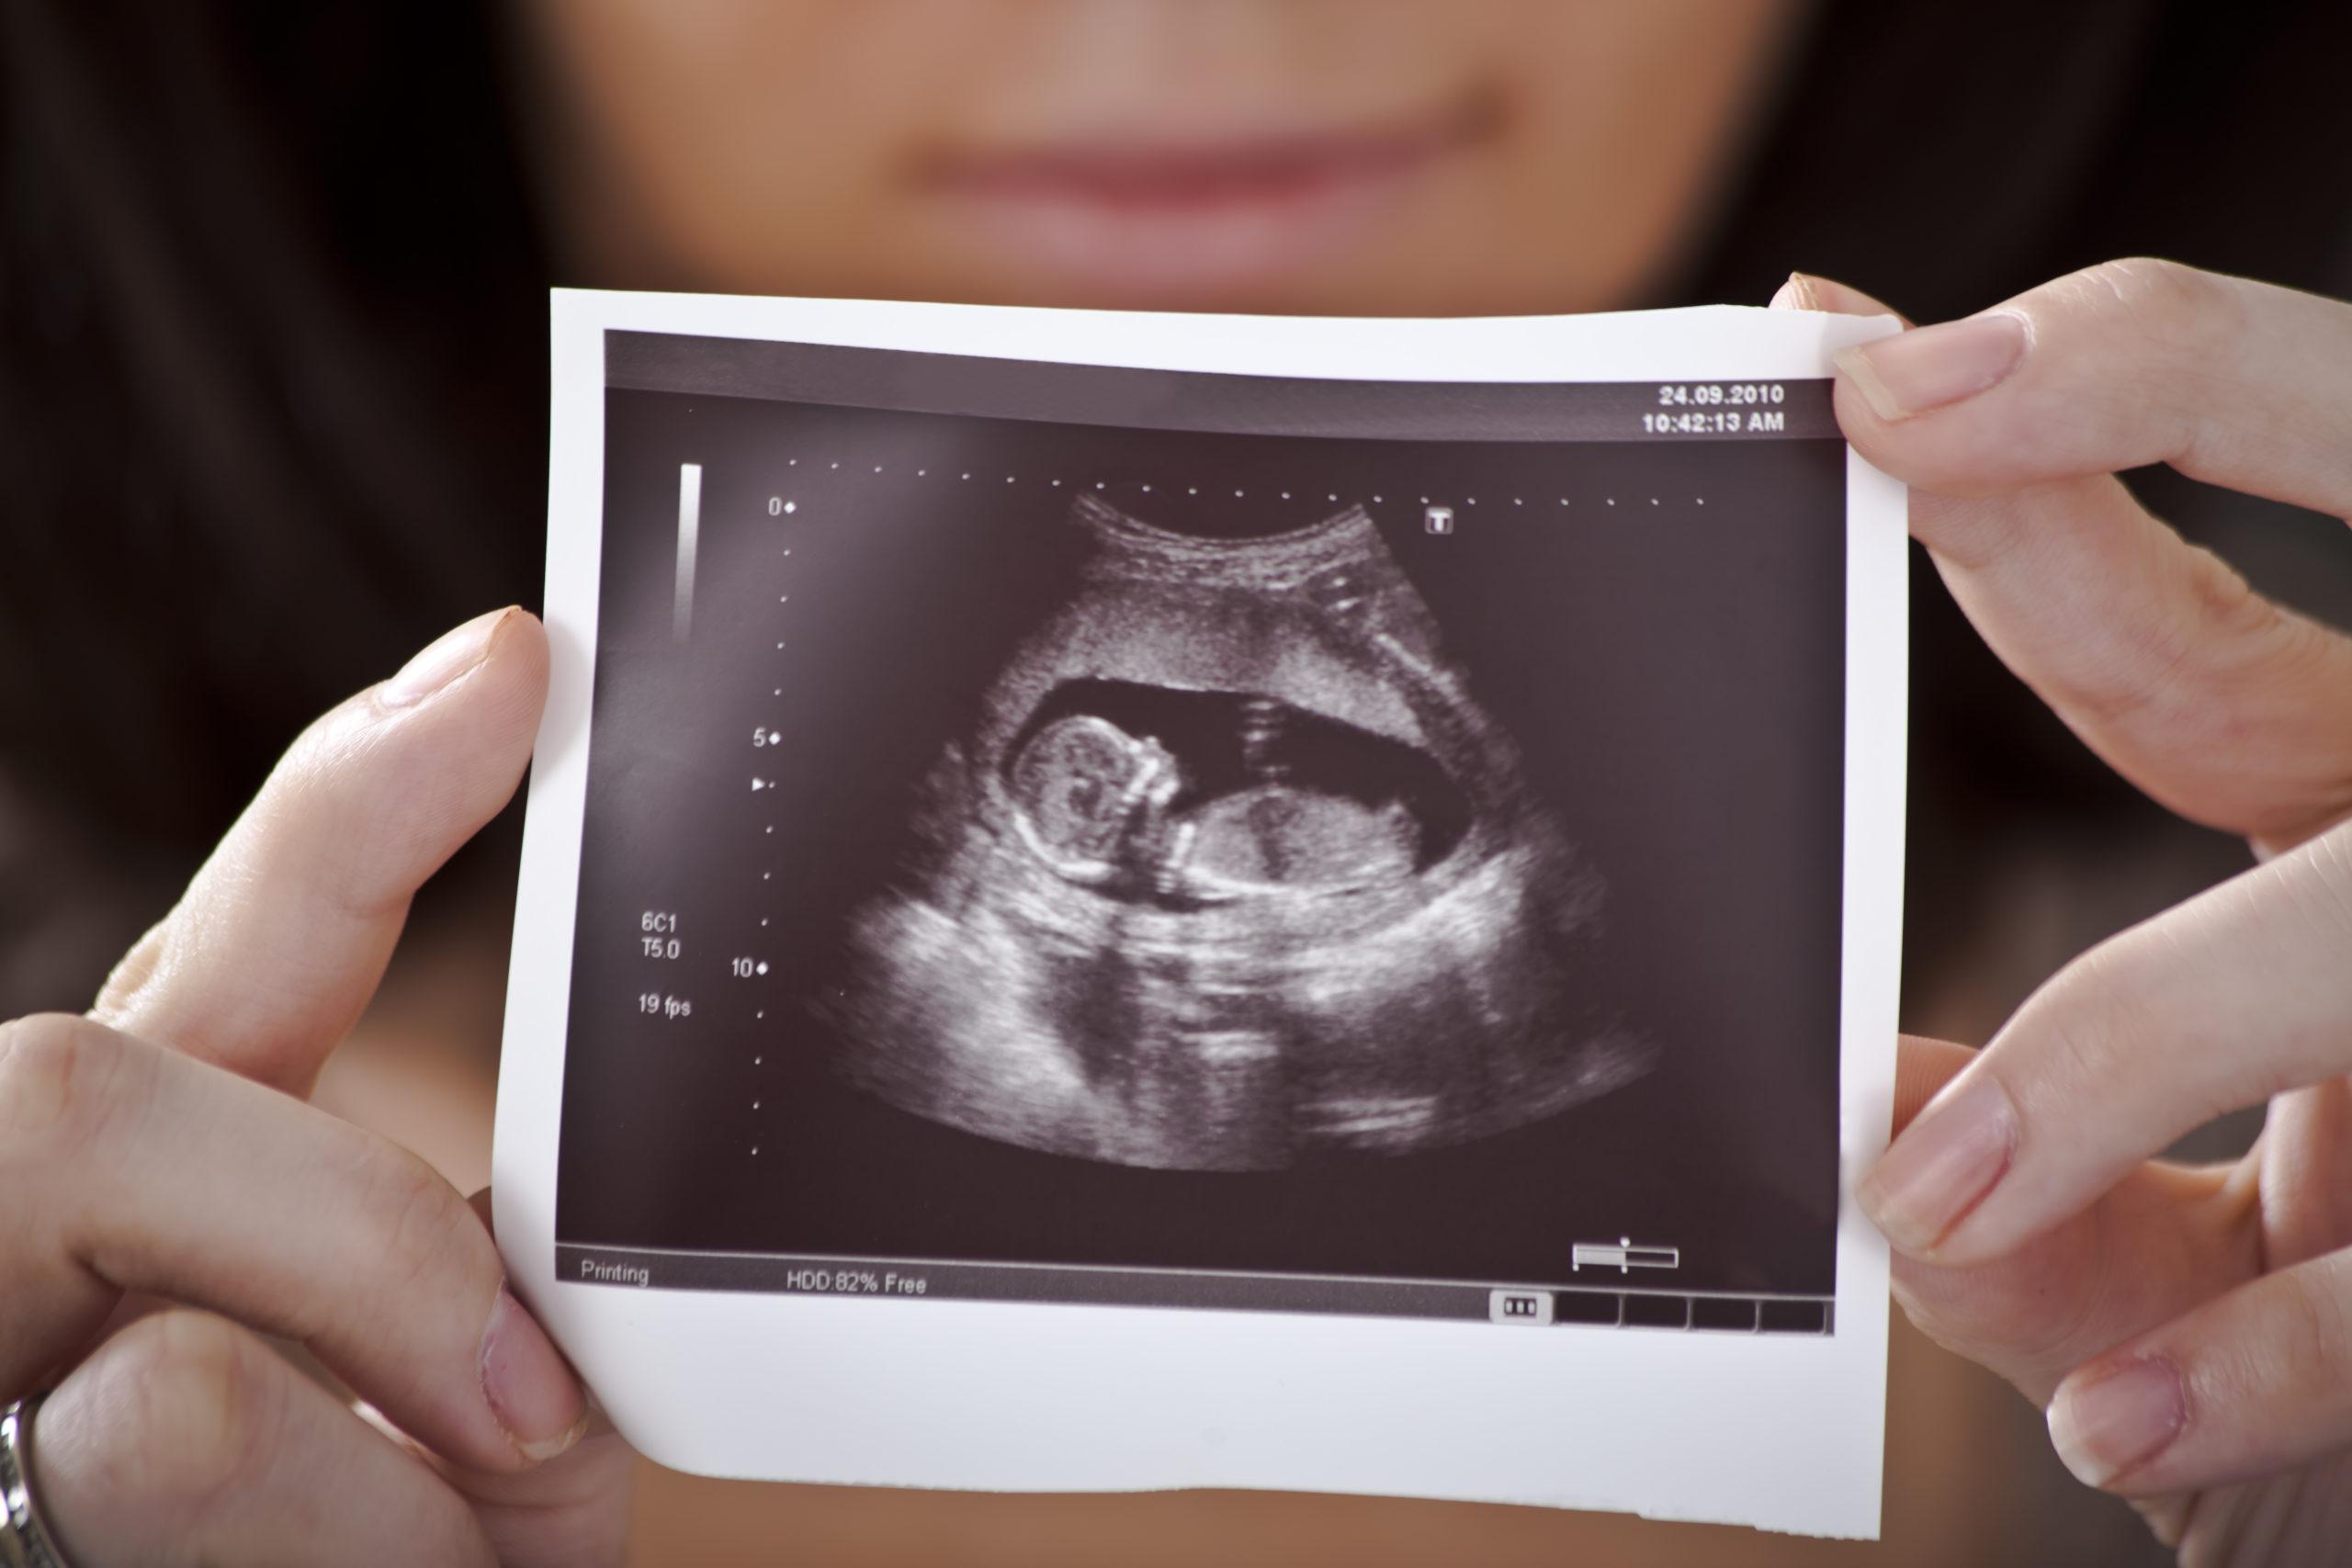 How to Know Baby is Healthy in Womb Without Ultrasound